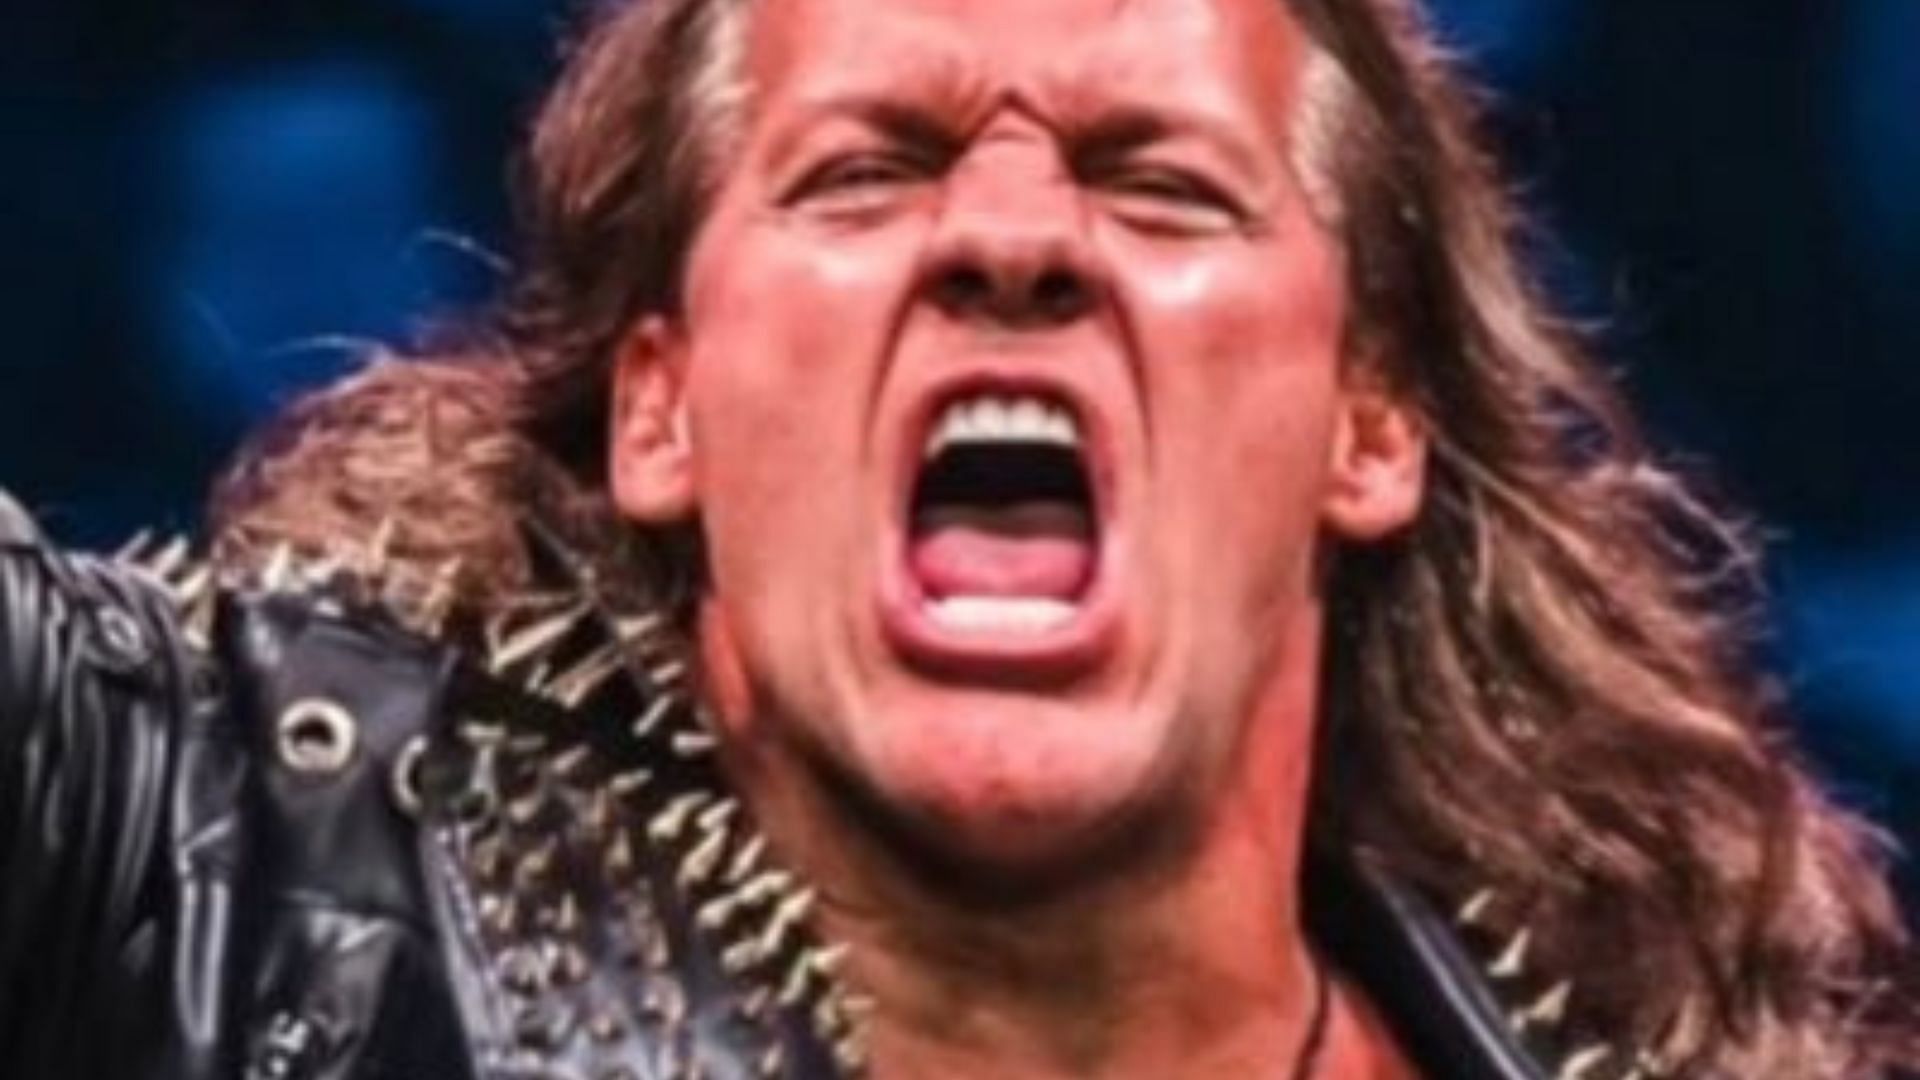 Several AEW stars have been announced to appear in Chris Jericho